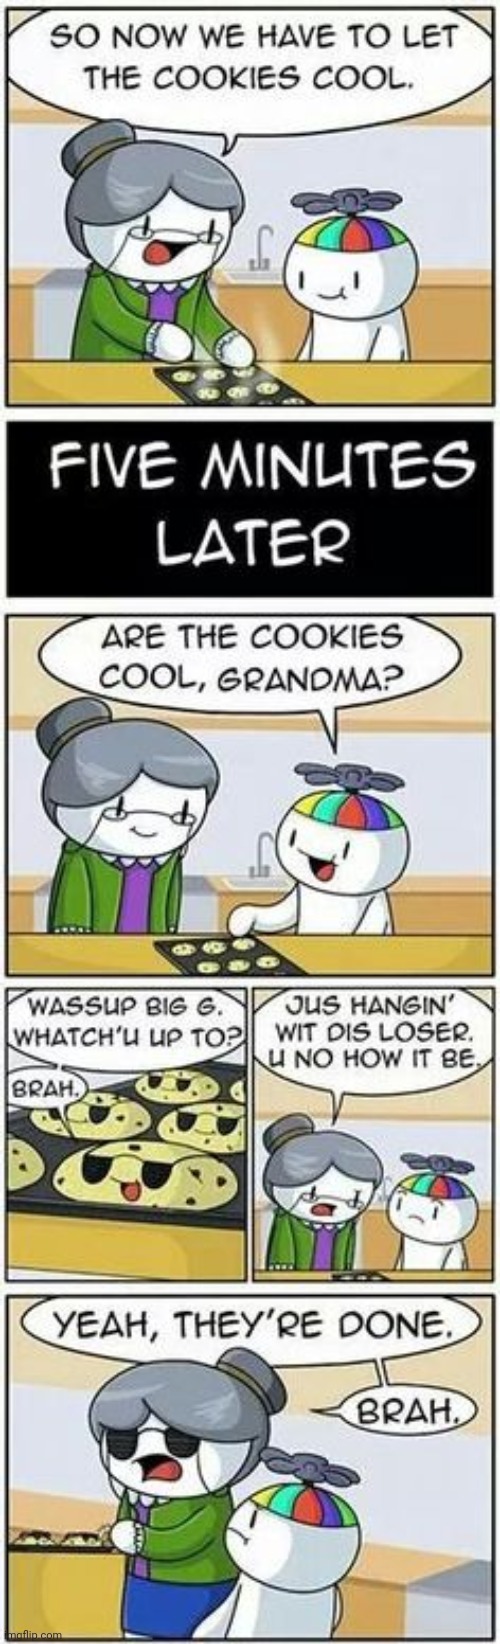 Cool cookies | image tagged in cookies,cookie,theodd1sout,comics,comic,comics/cartoons | made w/ Imgflip meme maker